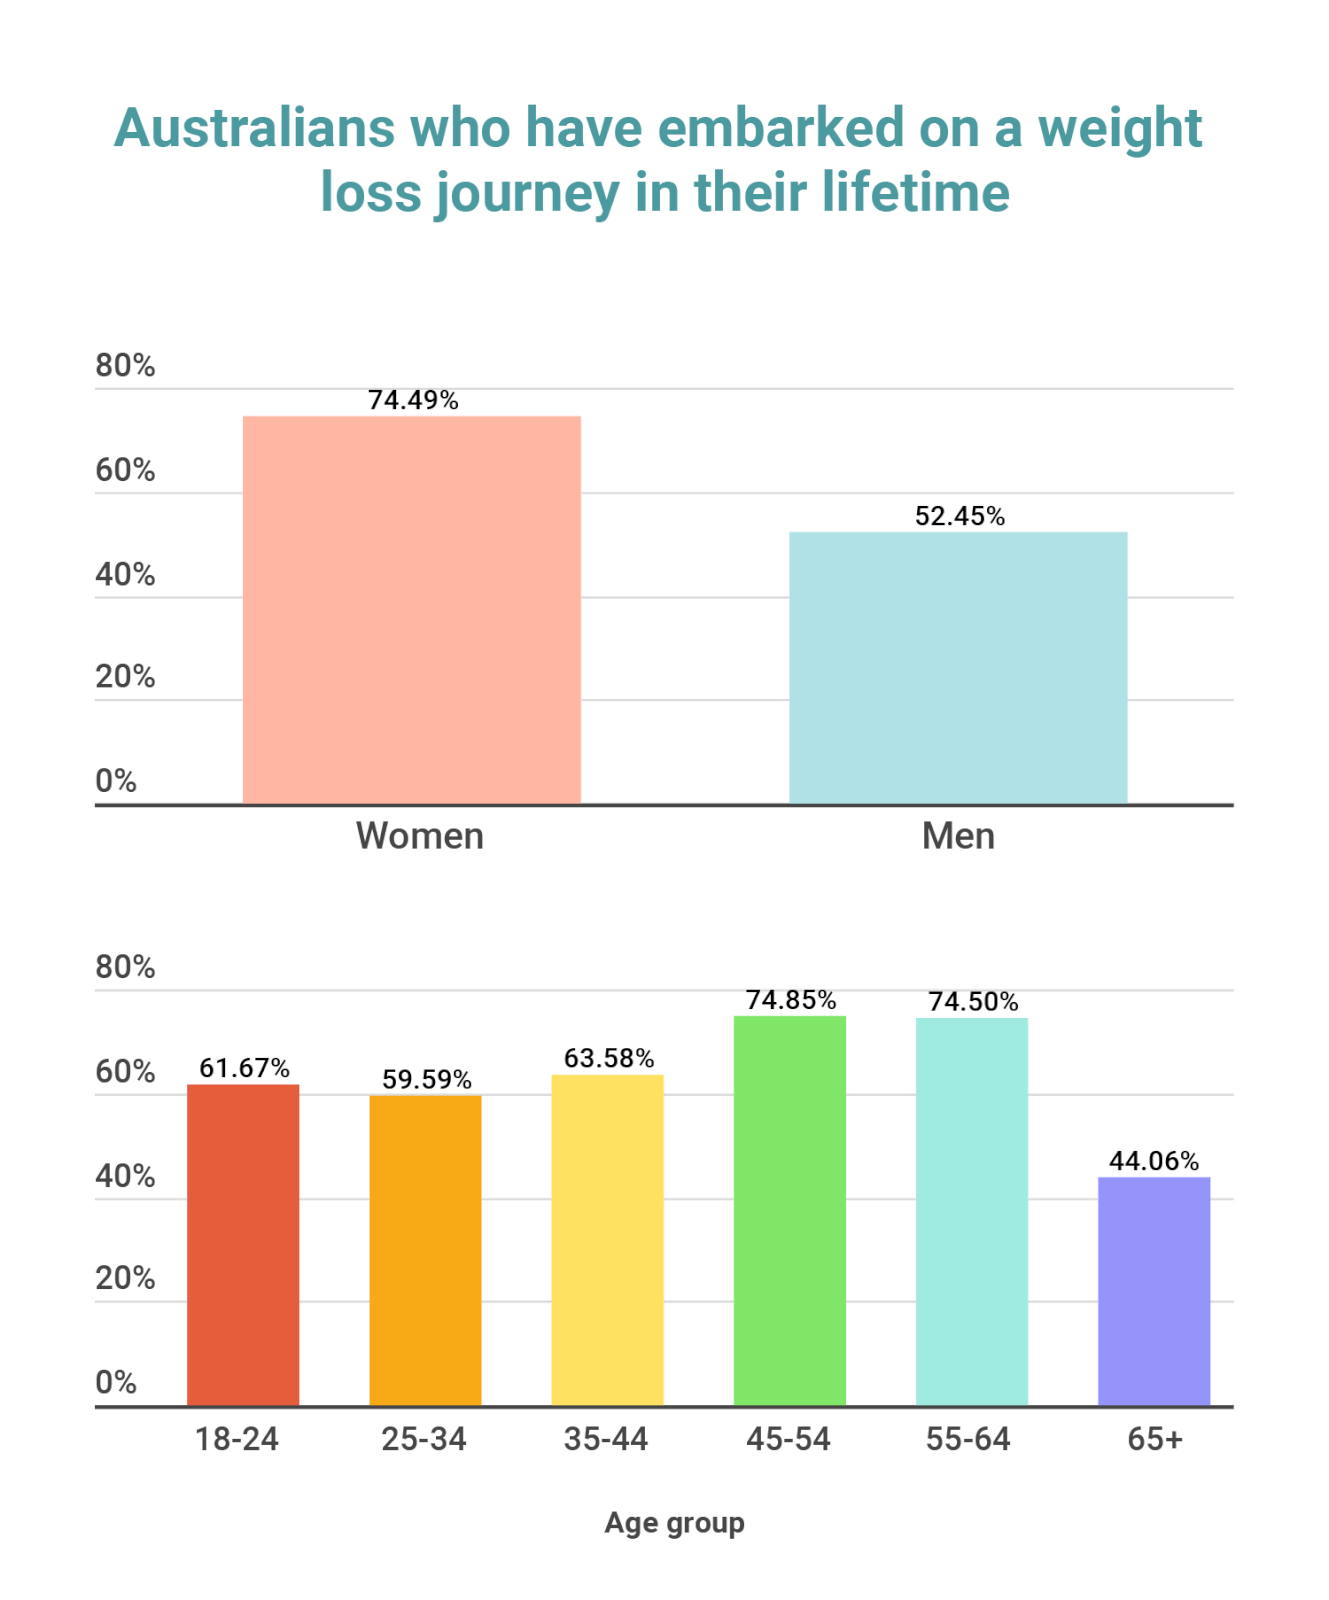 A bar chart showing the intention to lose weight from Australian survey respondents